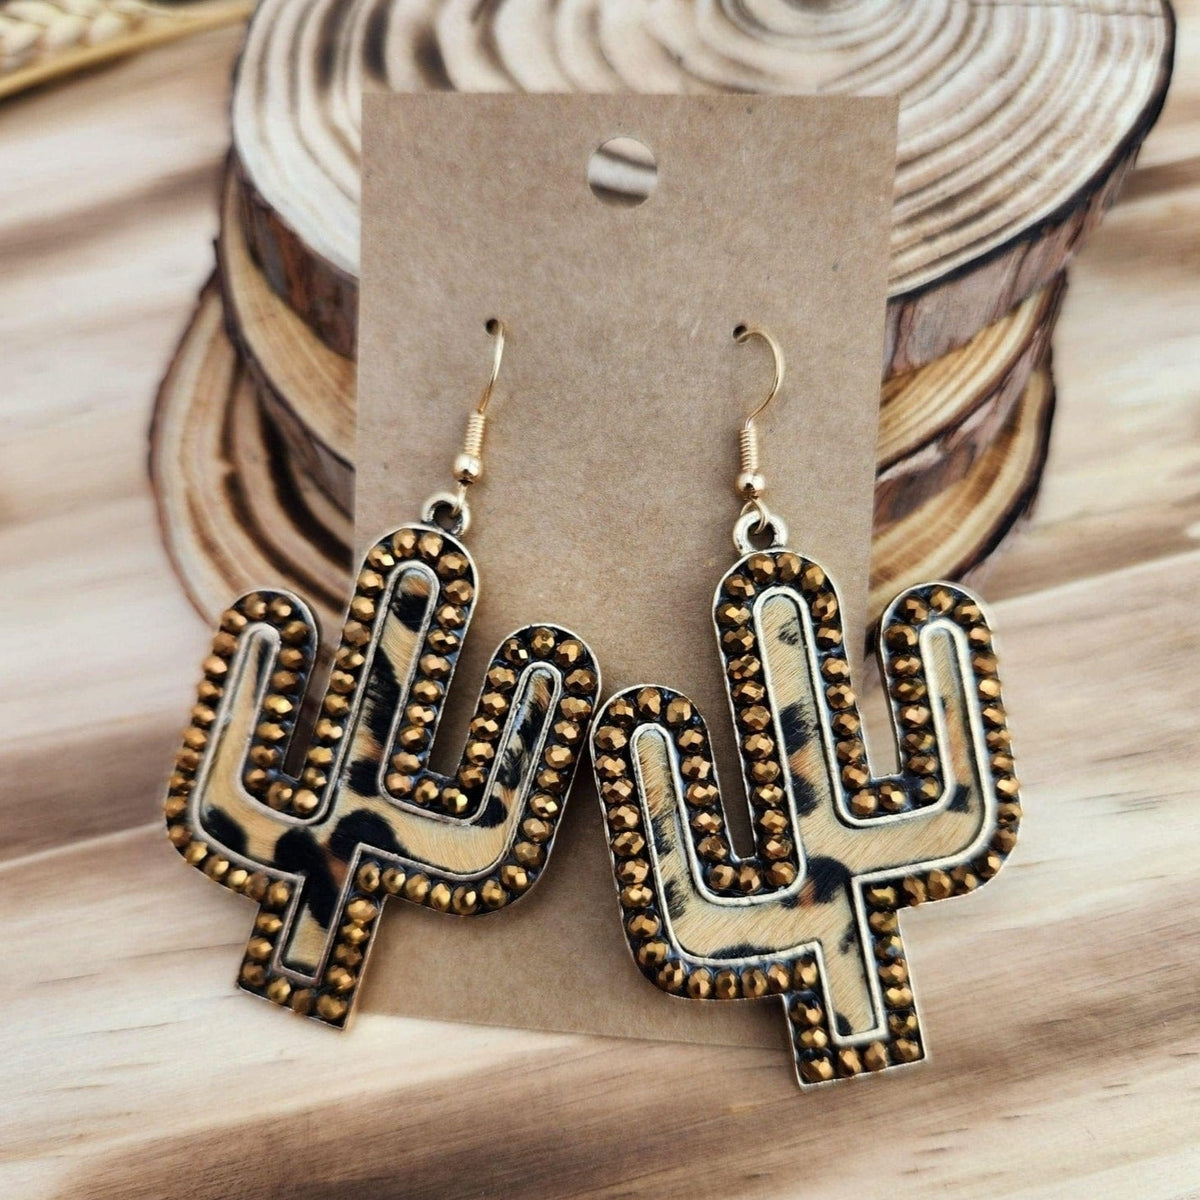 Rhinestone and Hide Cactus Earrings TheFringeCultureCollective